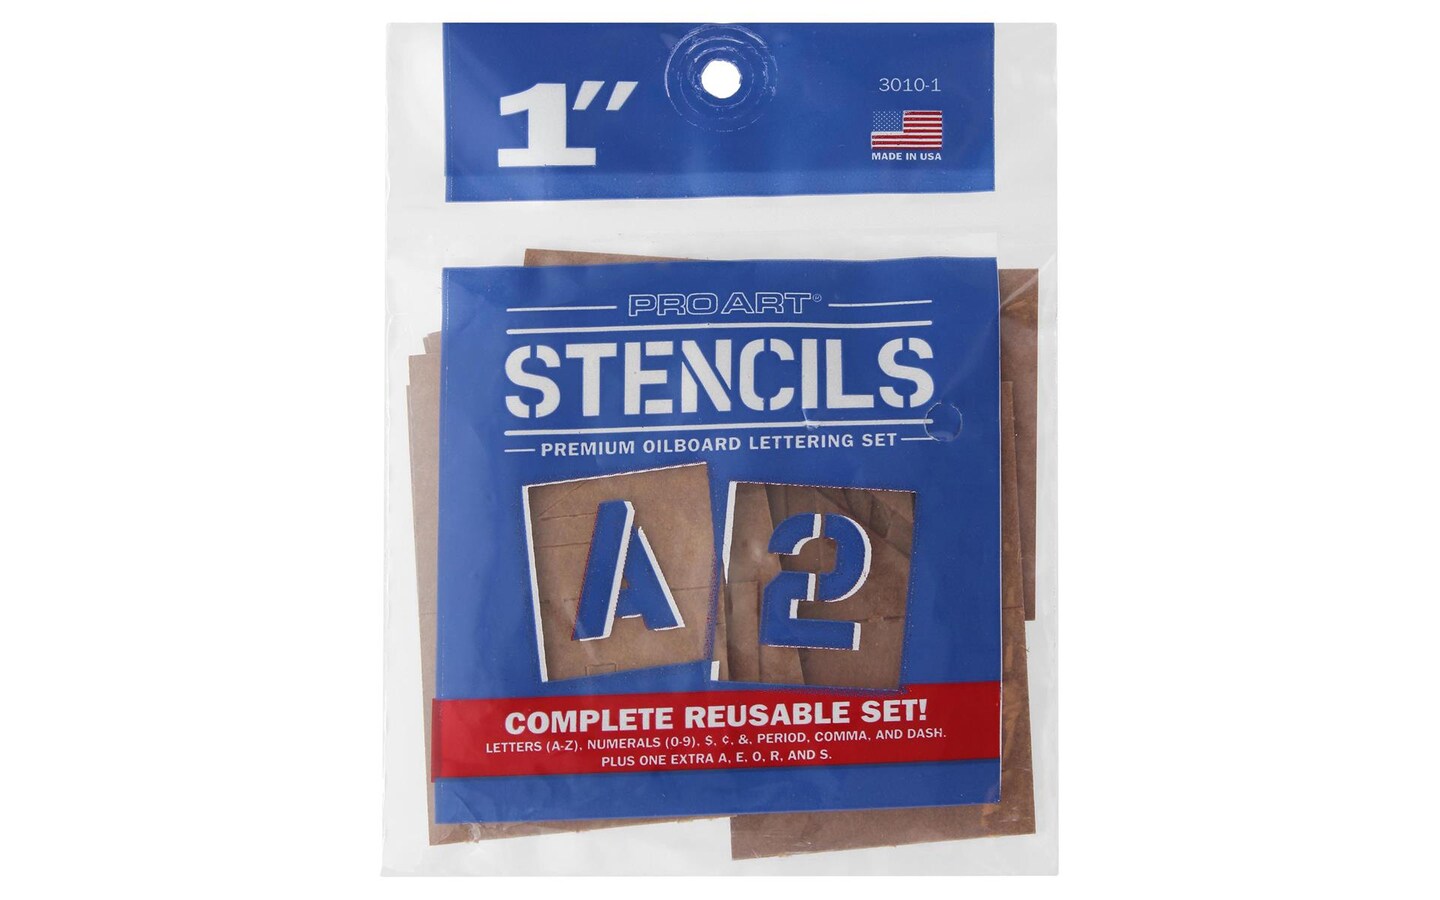 Pro Art Oil Board Stencil Set 1&#x22; for Painting on Wood, Canvas, Paper, Fabric, Wall and Tile, Reusable DIY Art and Craft Stencils for Painting, 6&#x22;x6&#x22; Inches